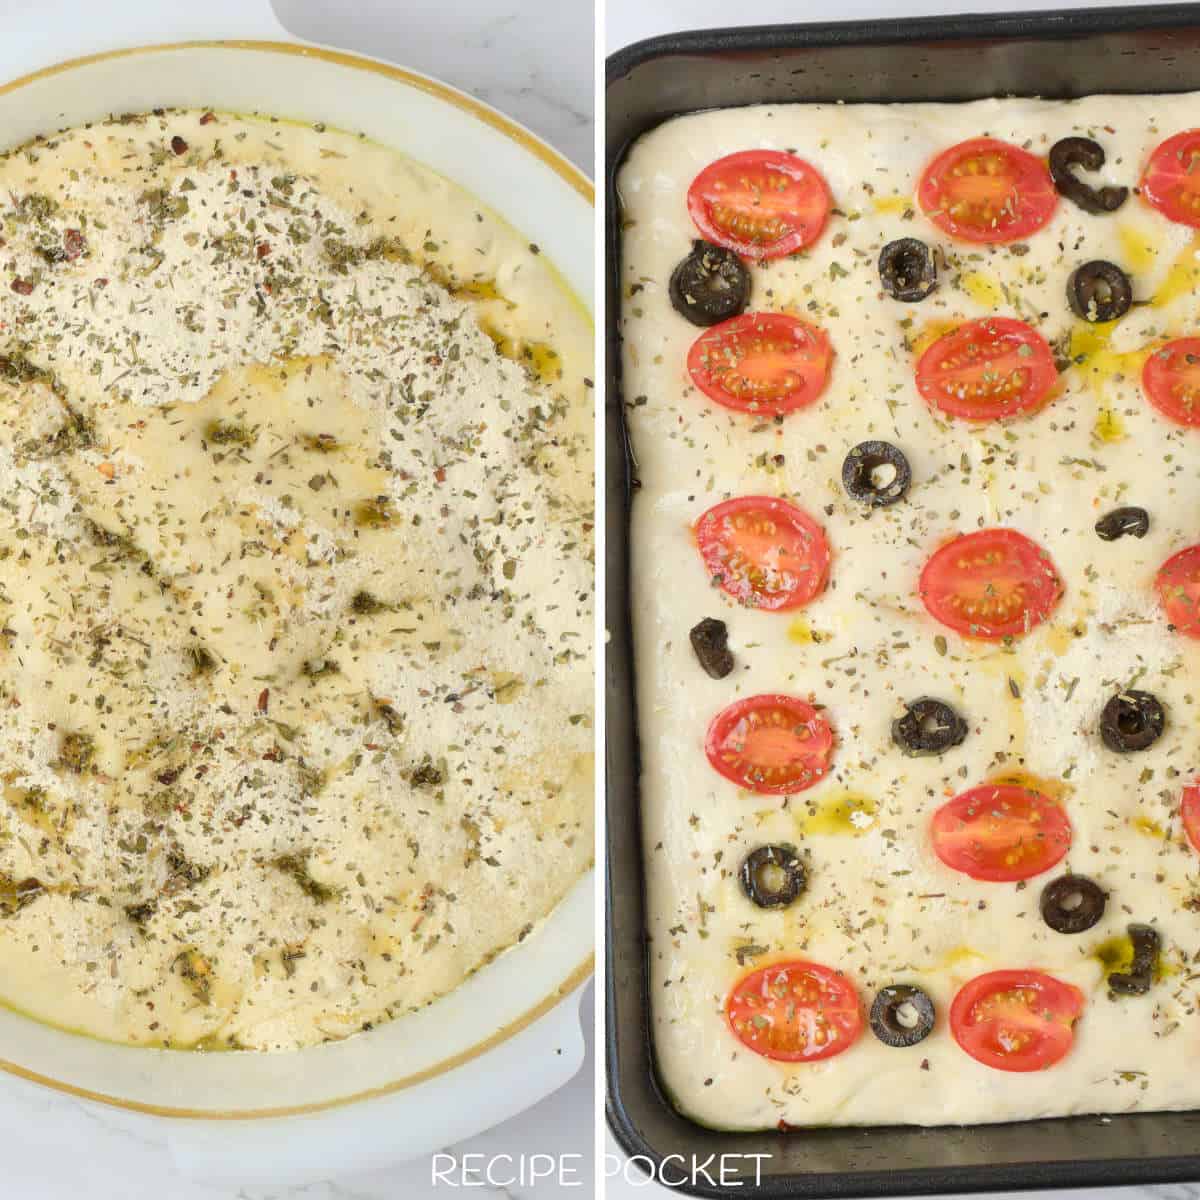 Image showing toppings of focaccia dough before baking.